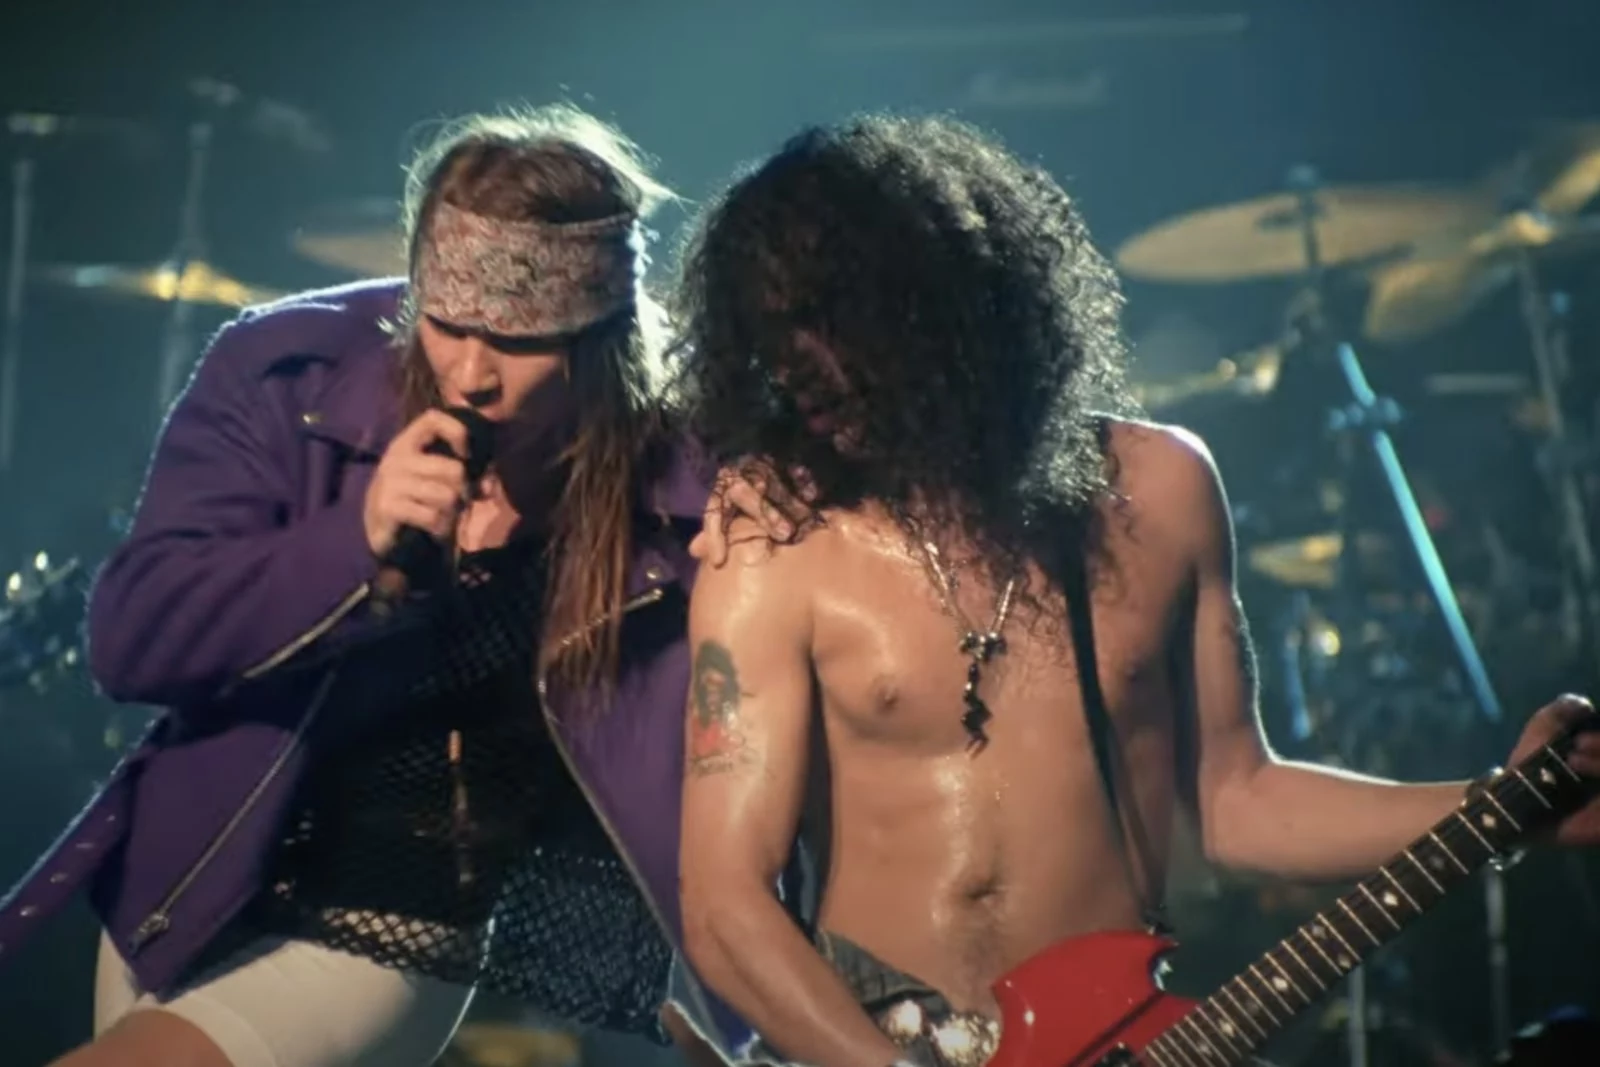 Watch Guns N' Roses' New Live 1991 Video for 'You Could Be Mine'